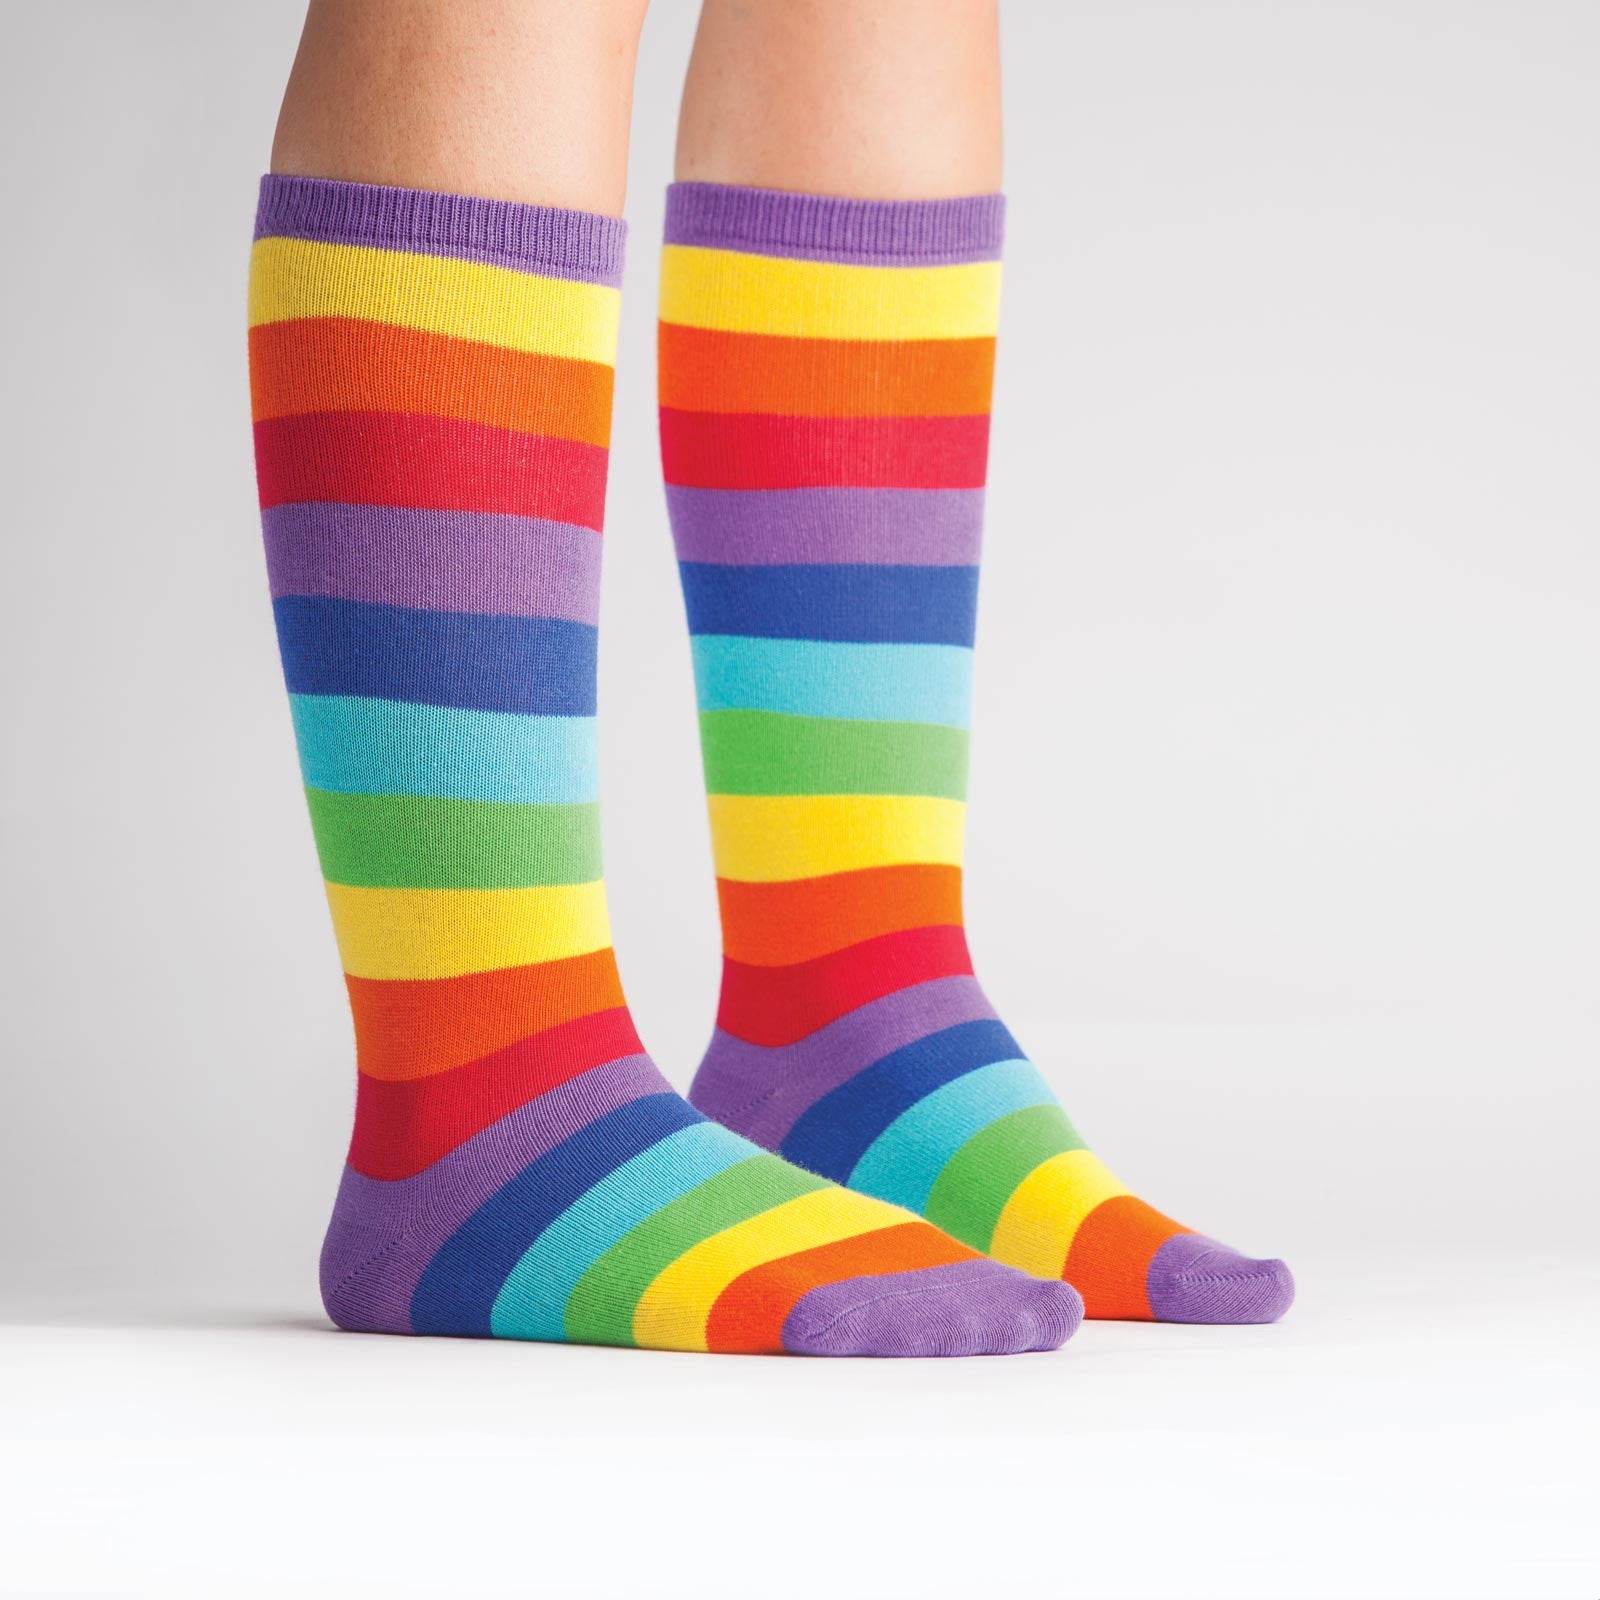 Brighten any rainy day with these rainbow striped knee-high socks for kids!